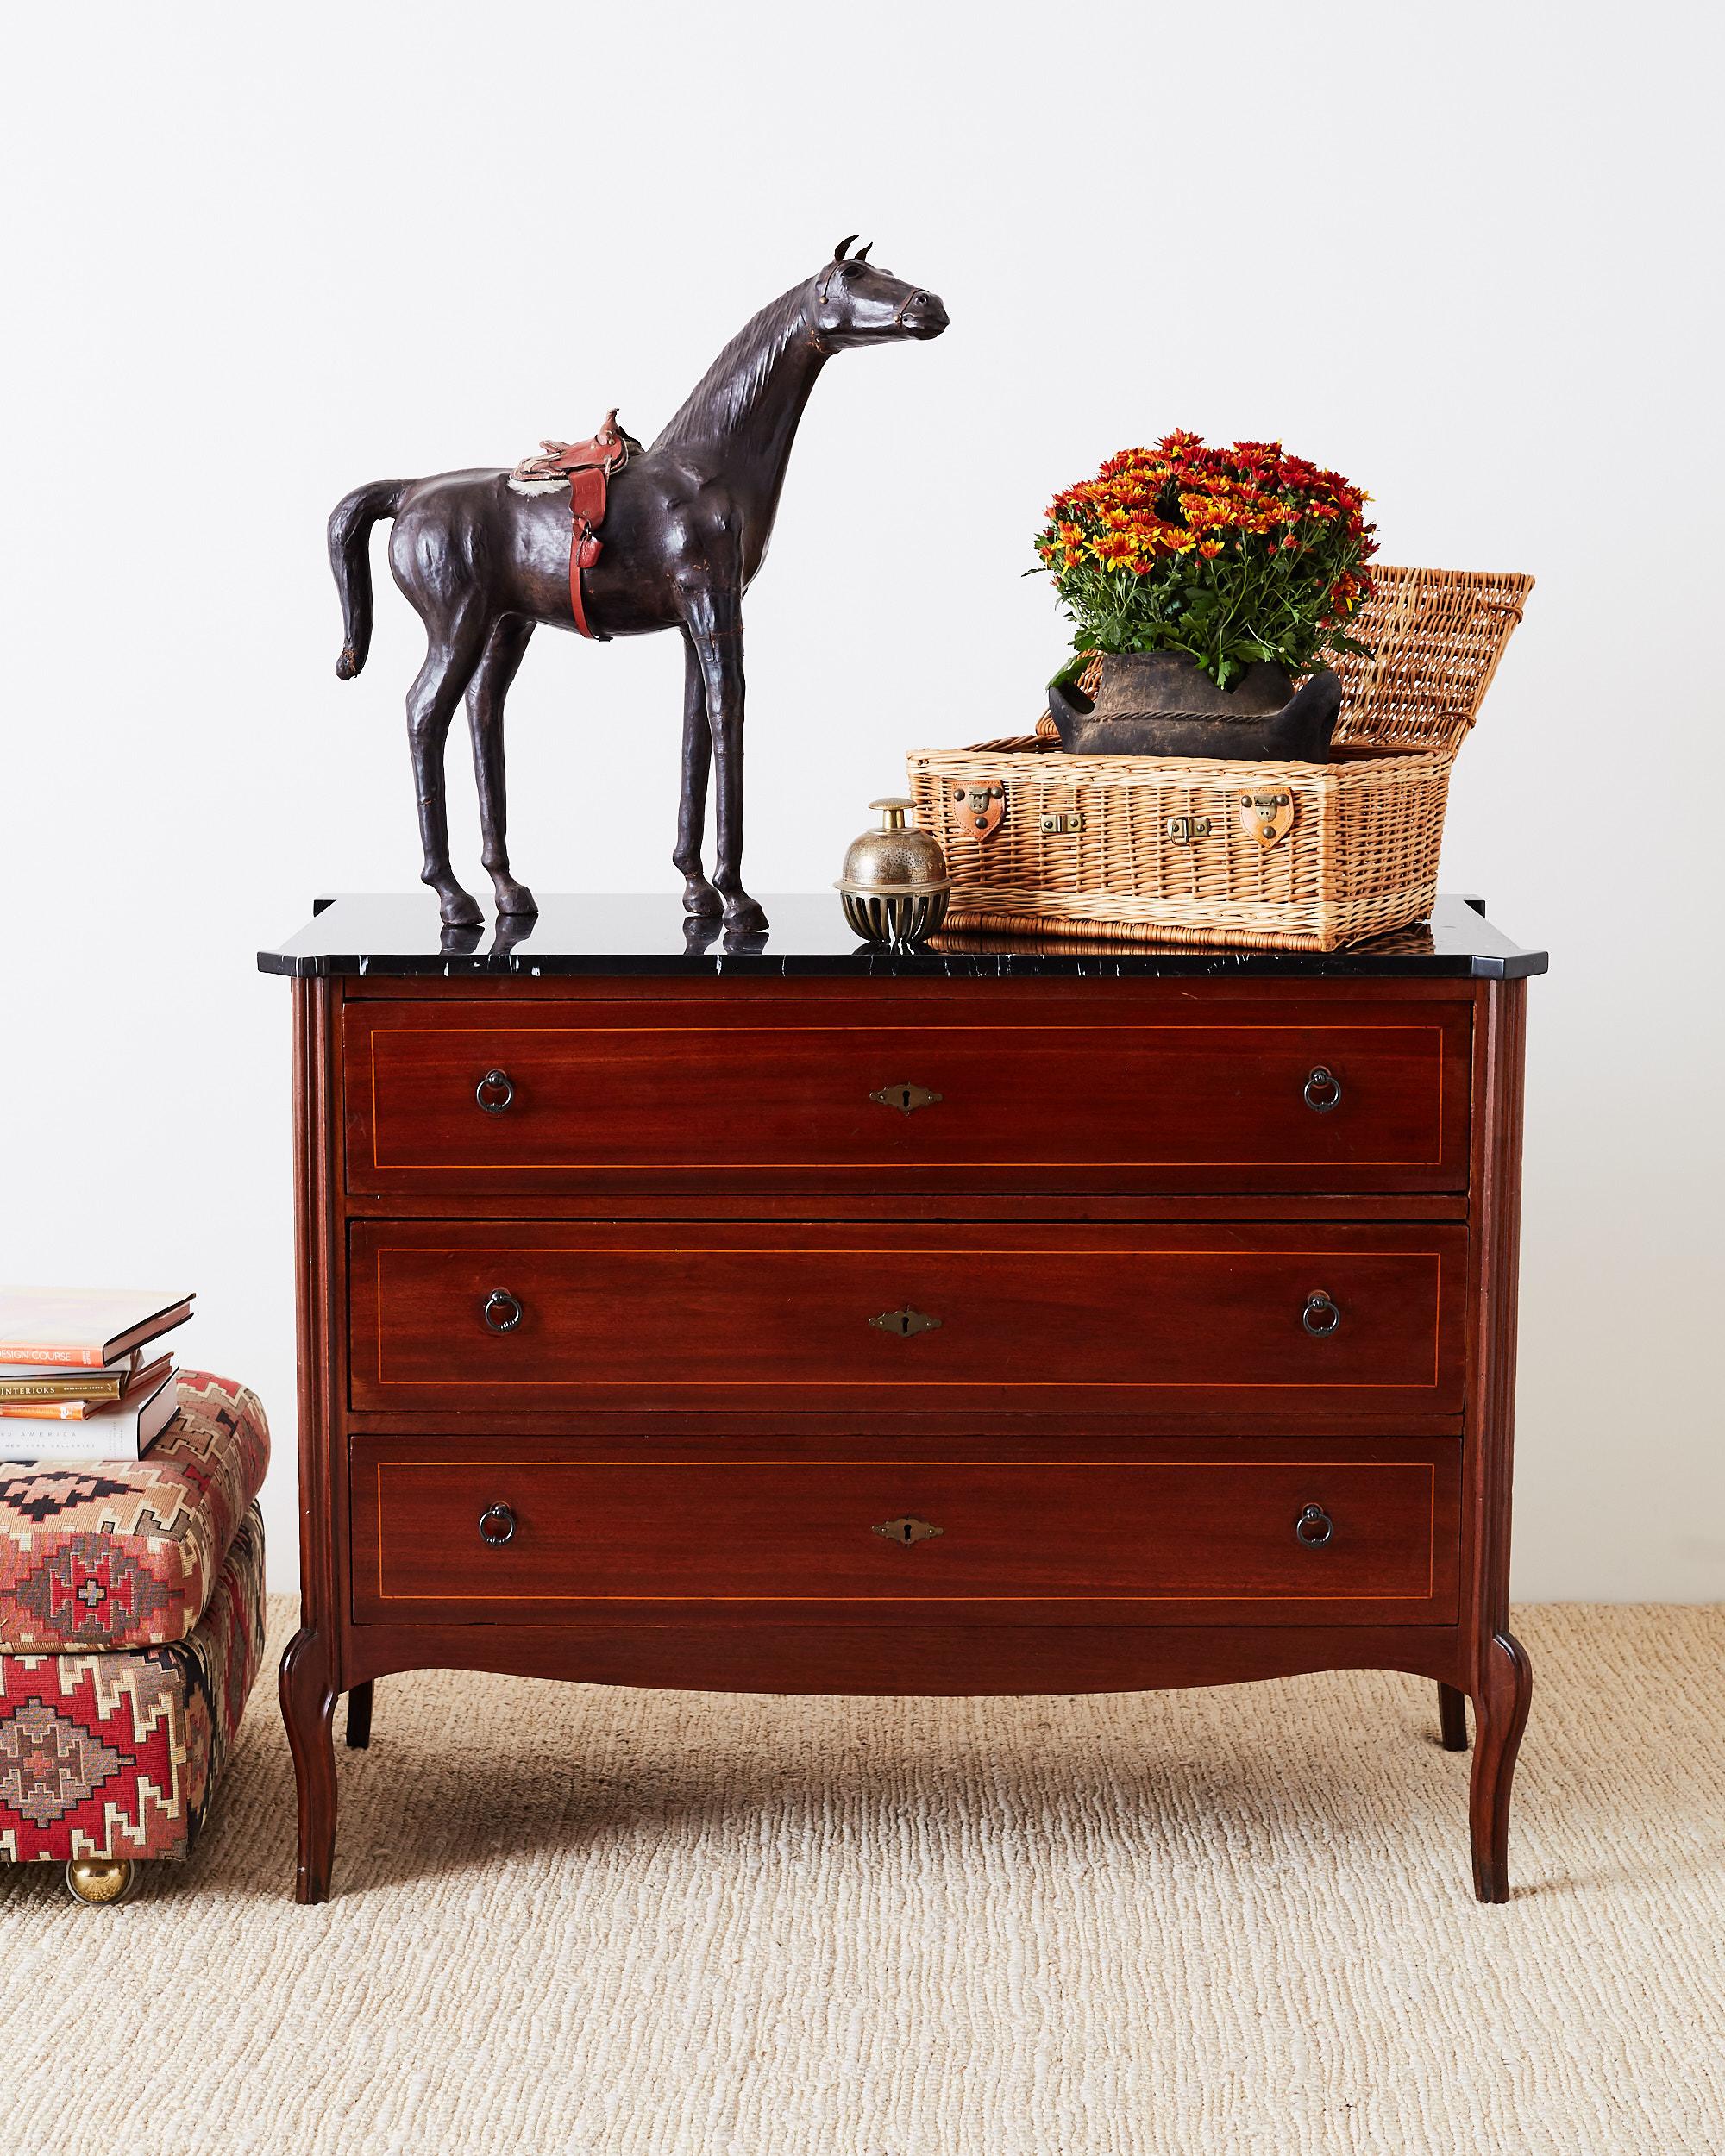 Stately mahogany neoclassical style commode or chest of drawers featuring a polished black marble top. The mahogany case is fronted by three legs drawers with satinwood thread inlay and brass ring pulls. Each corner has a reeded column design with